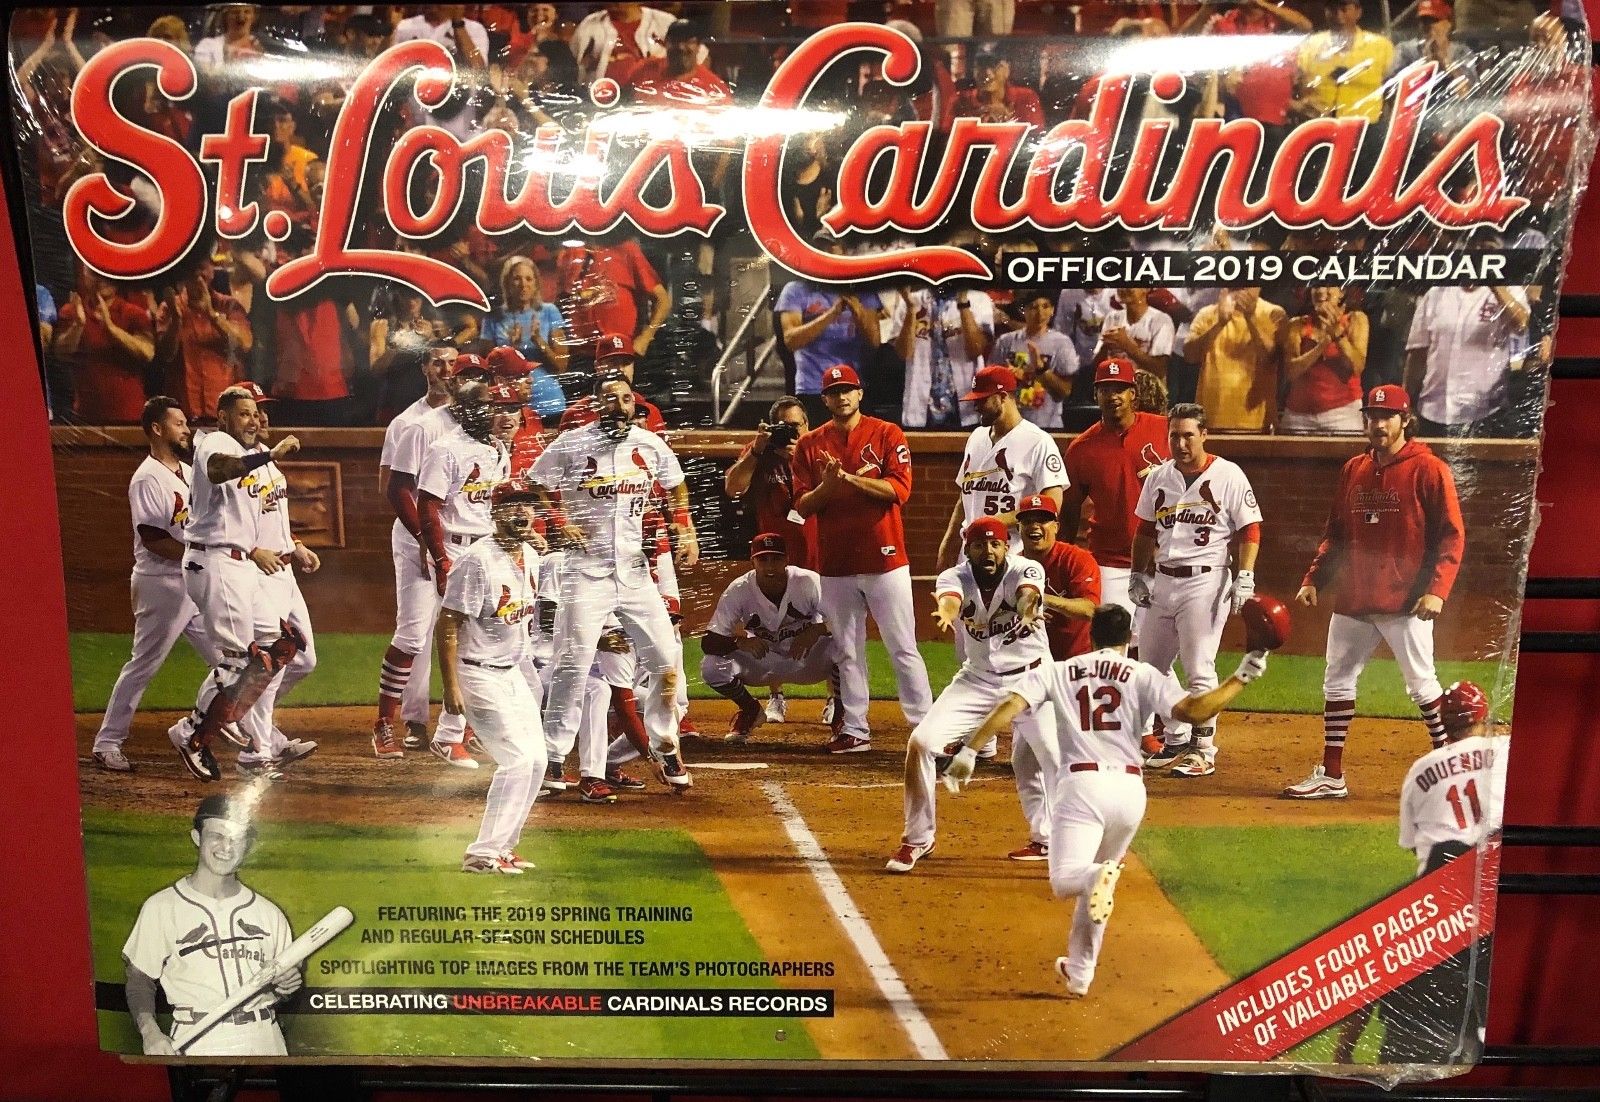 Get Your 2019 Official St. Louis Cardinals Calendar Here! ArchCity.Media